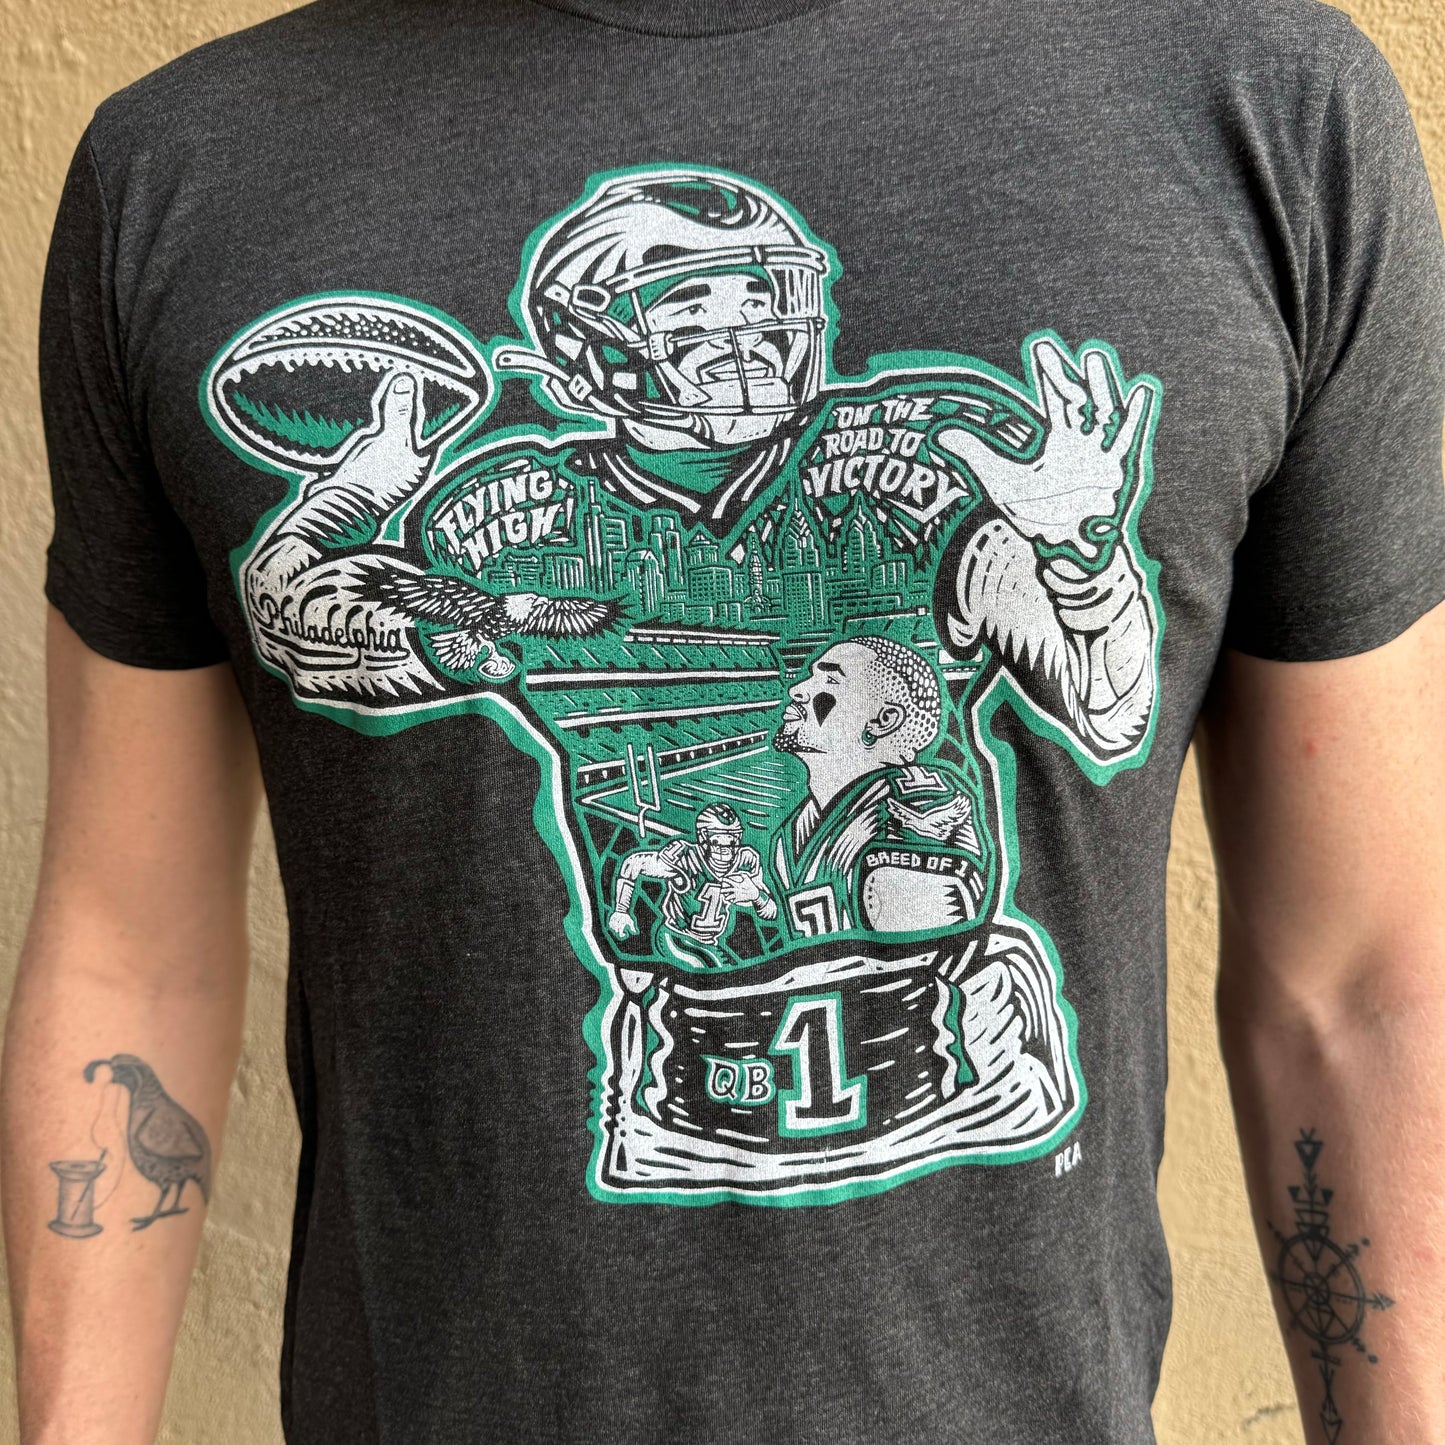 A person wearing a dark grey Jalen Hurts T-Shirt from Paul Carpenter, showcasing an illustrated design featuring a football player, cityscape skyline design, and various football-related elements in green and white.